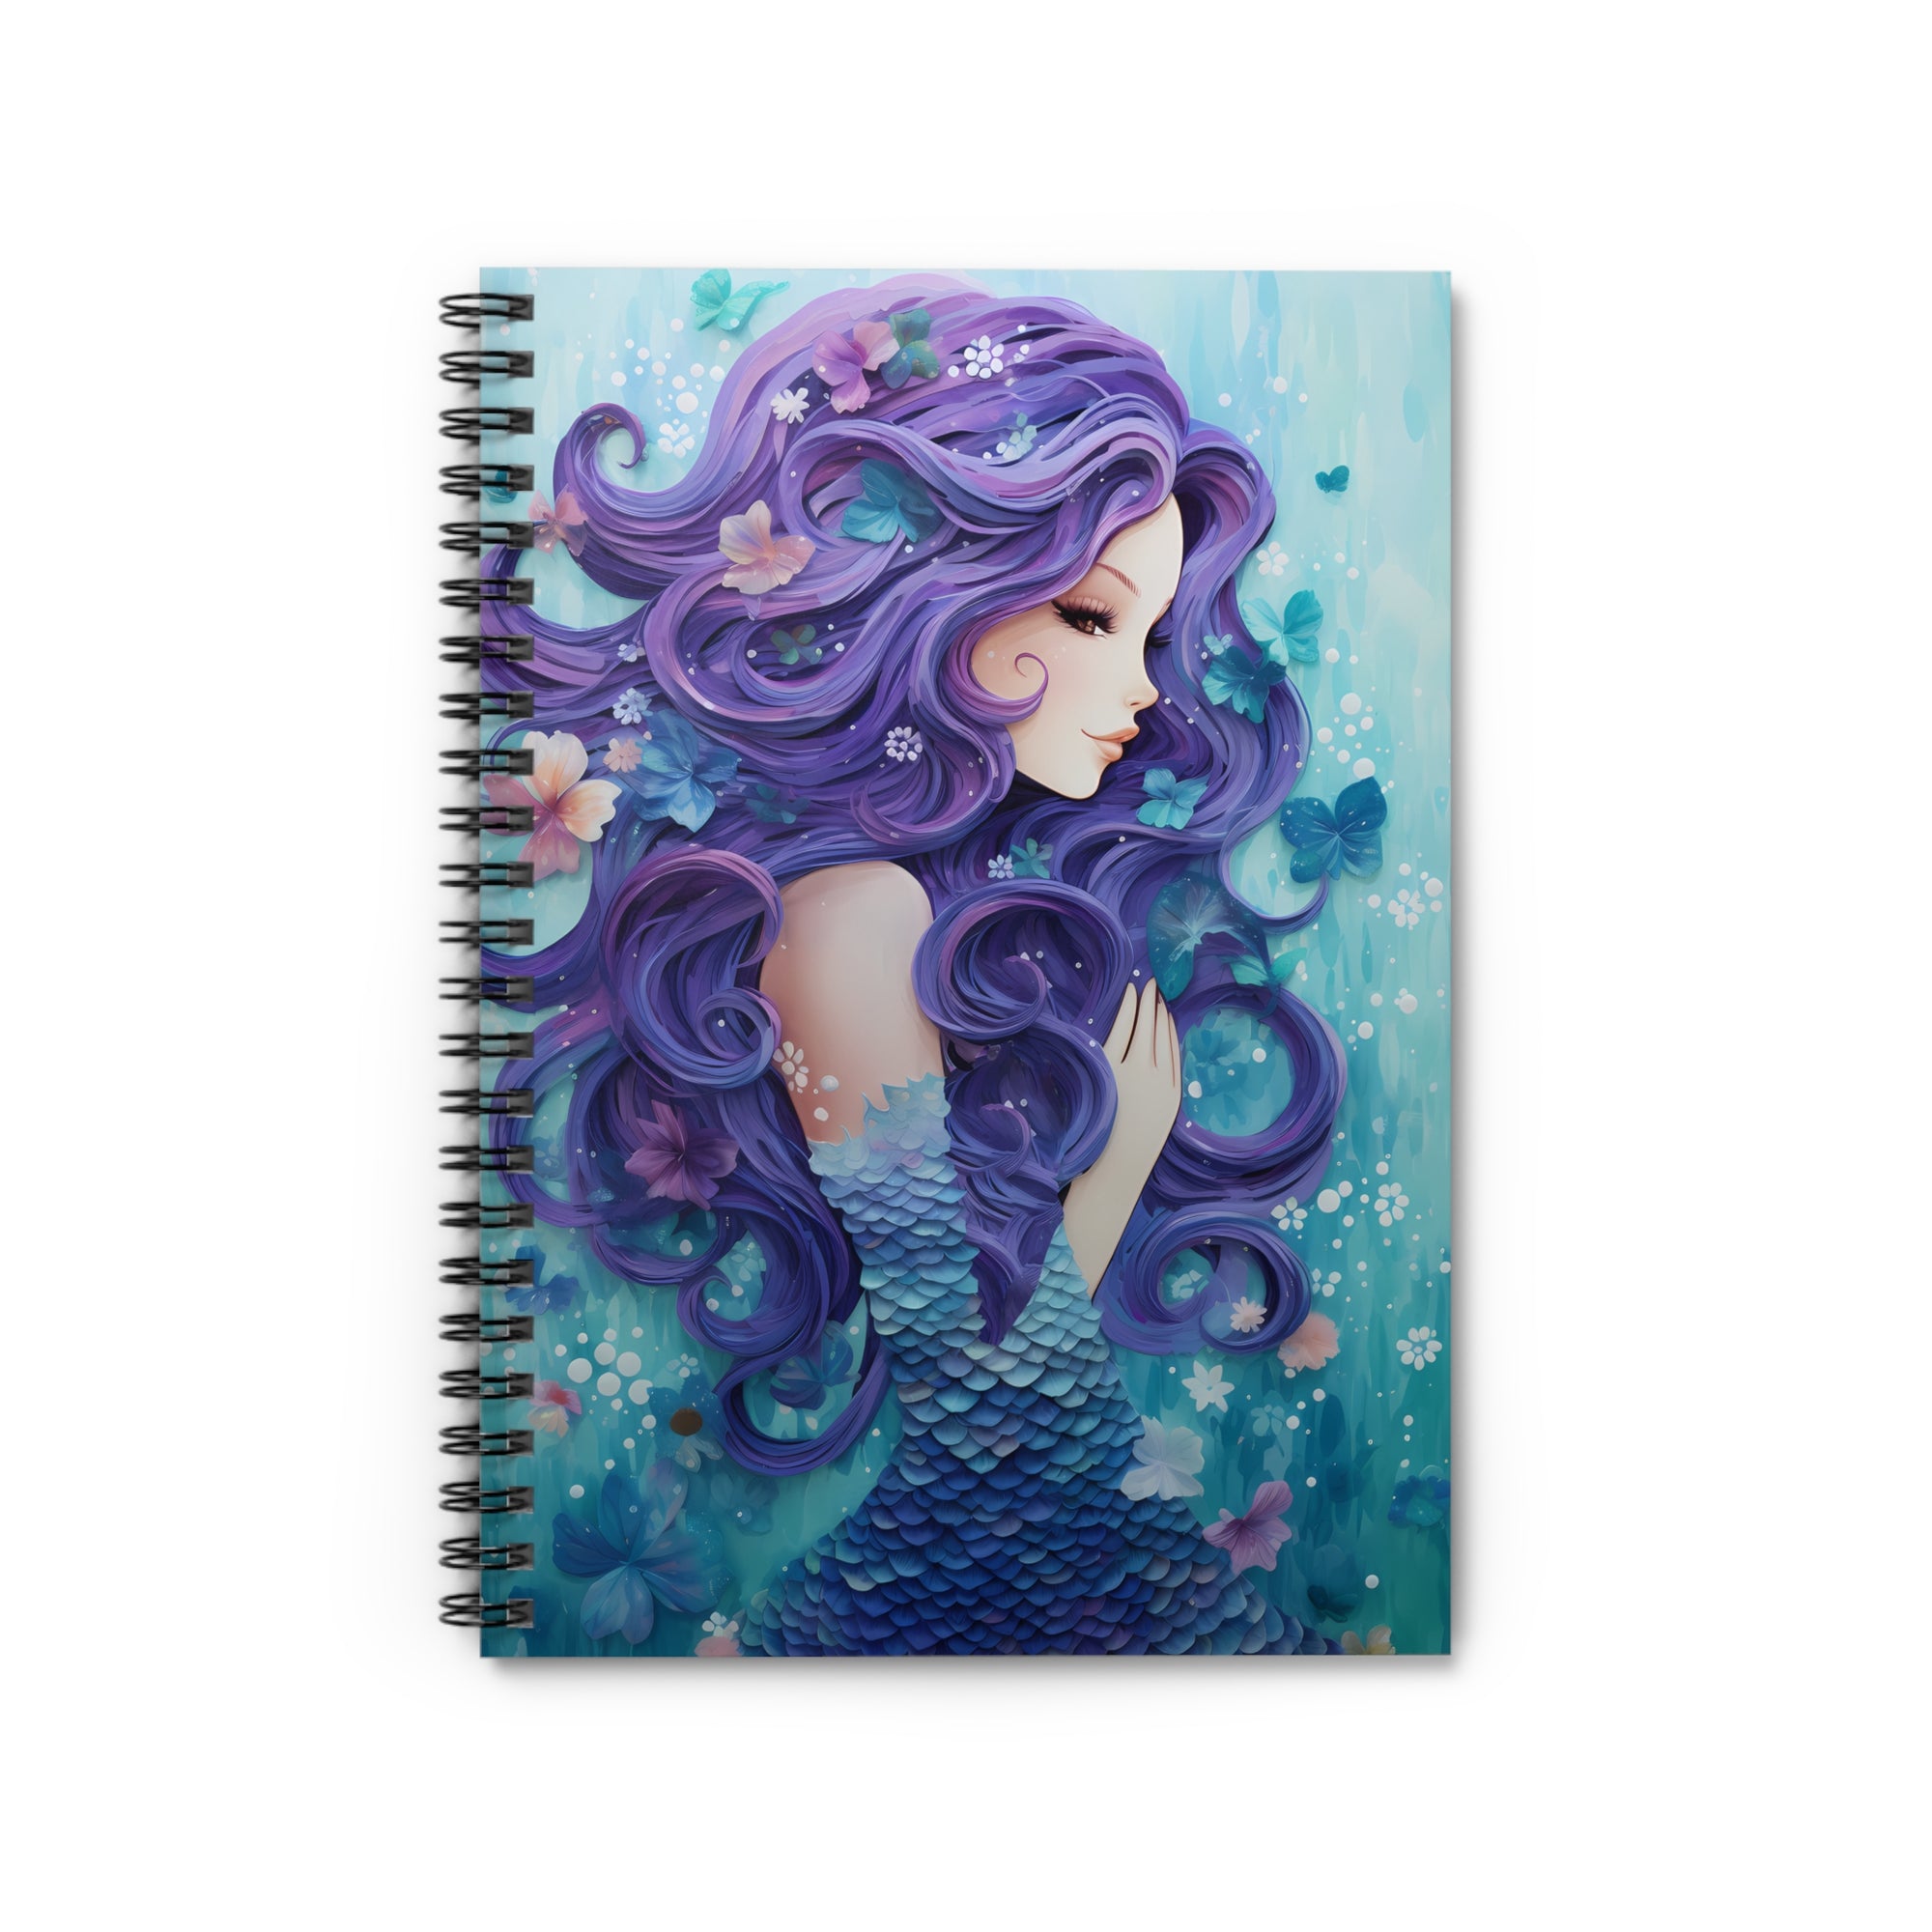 Flower Mermaid Spiral Ruled Line Notebook for Her, Soft Cover